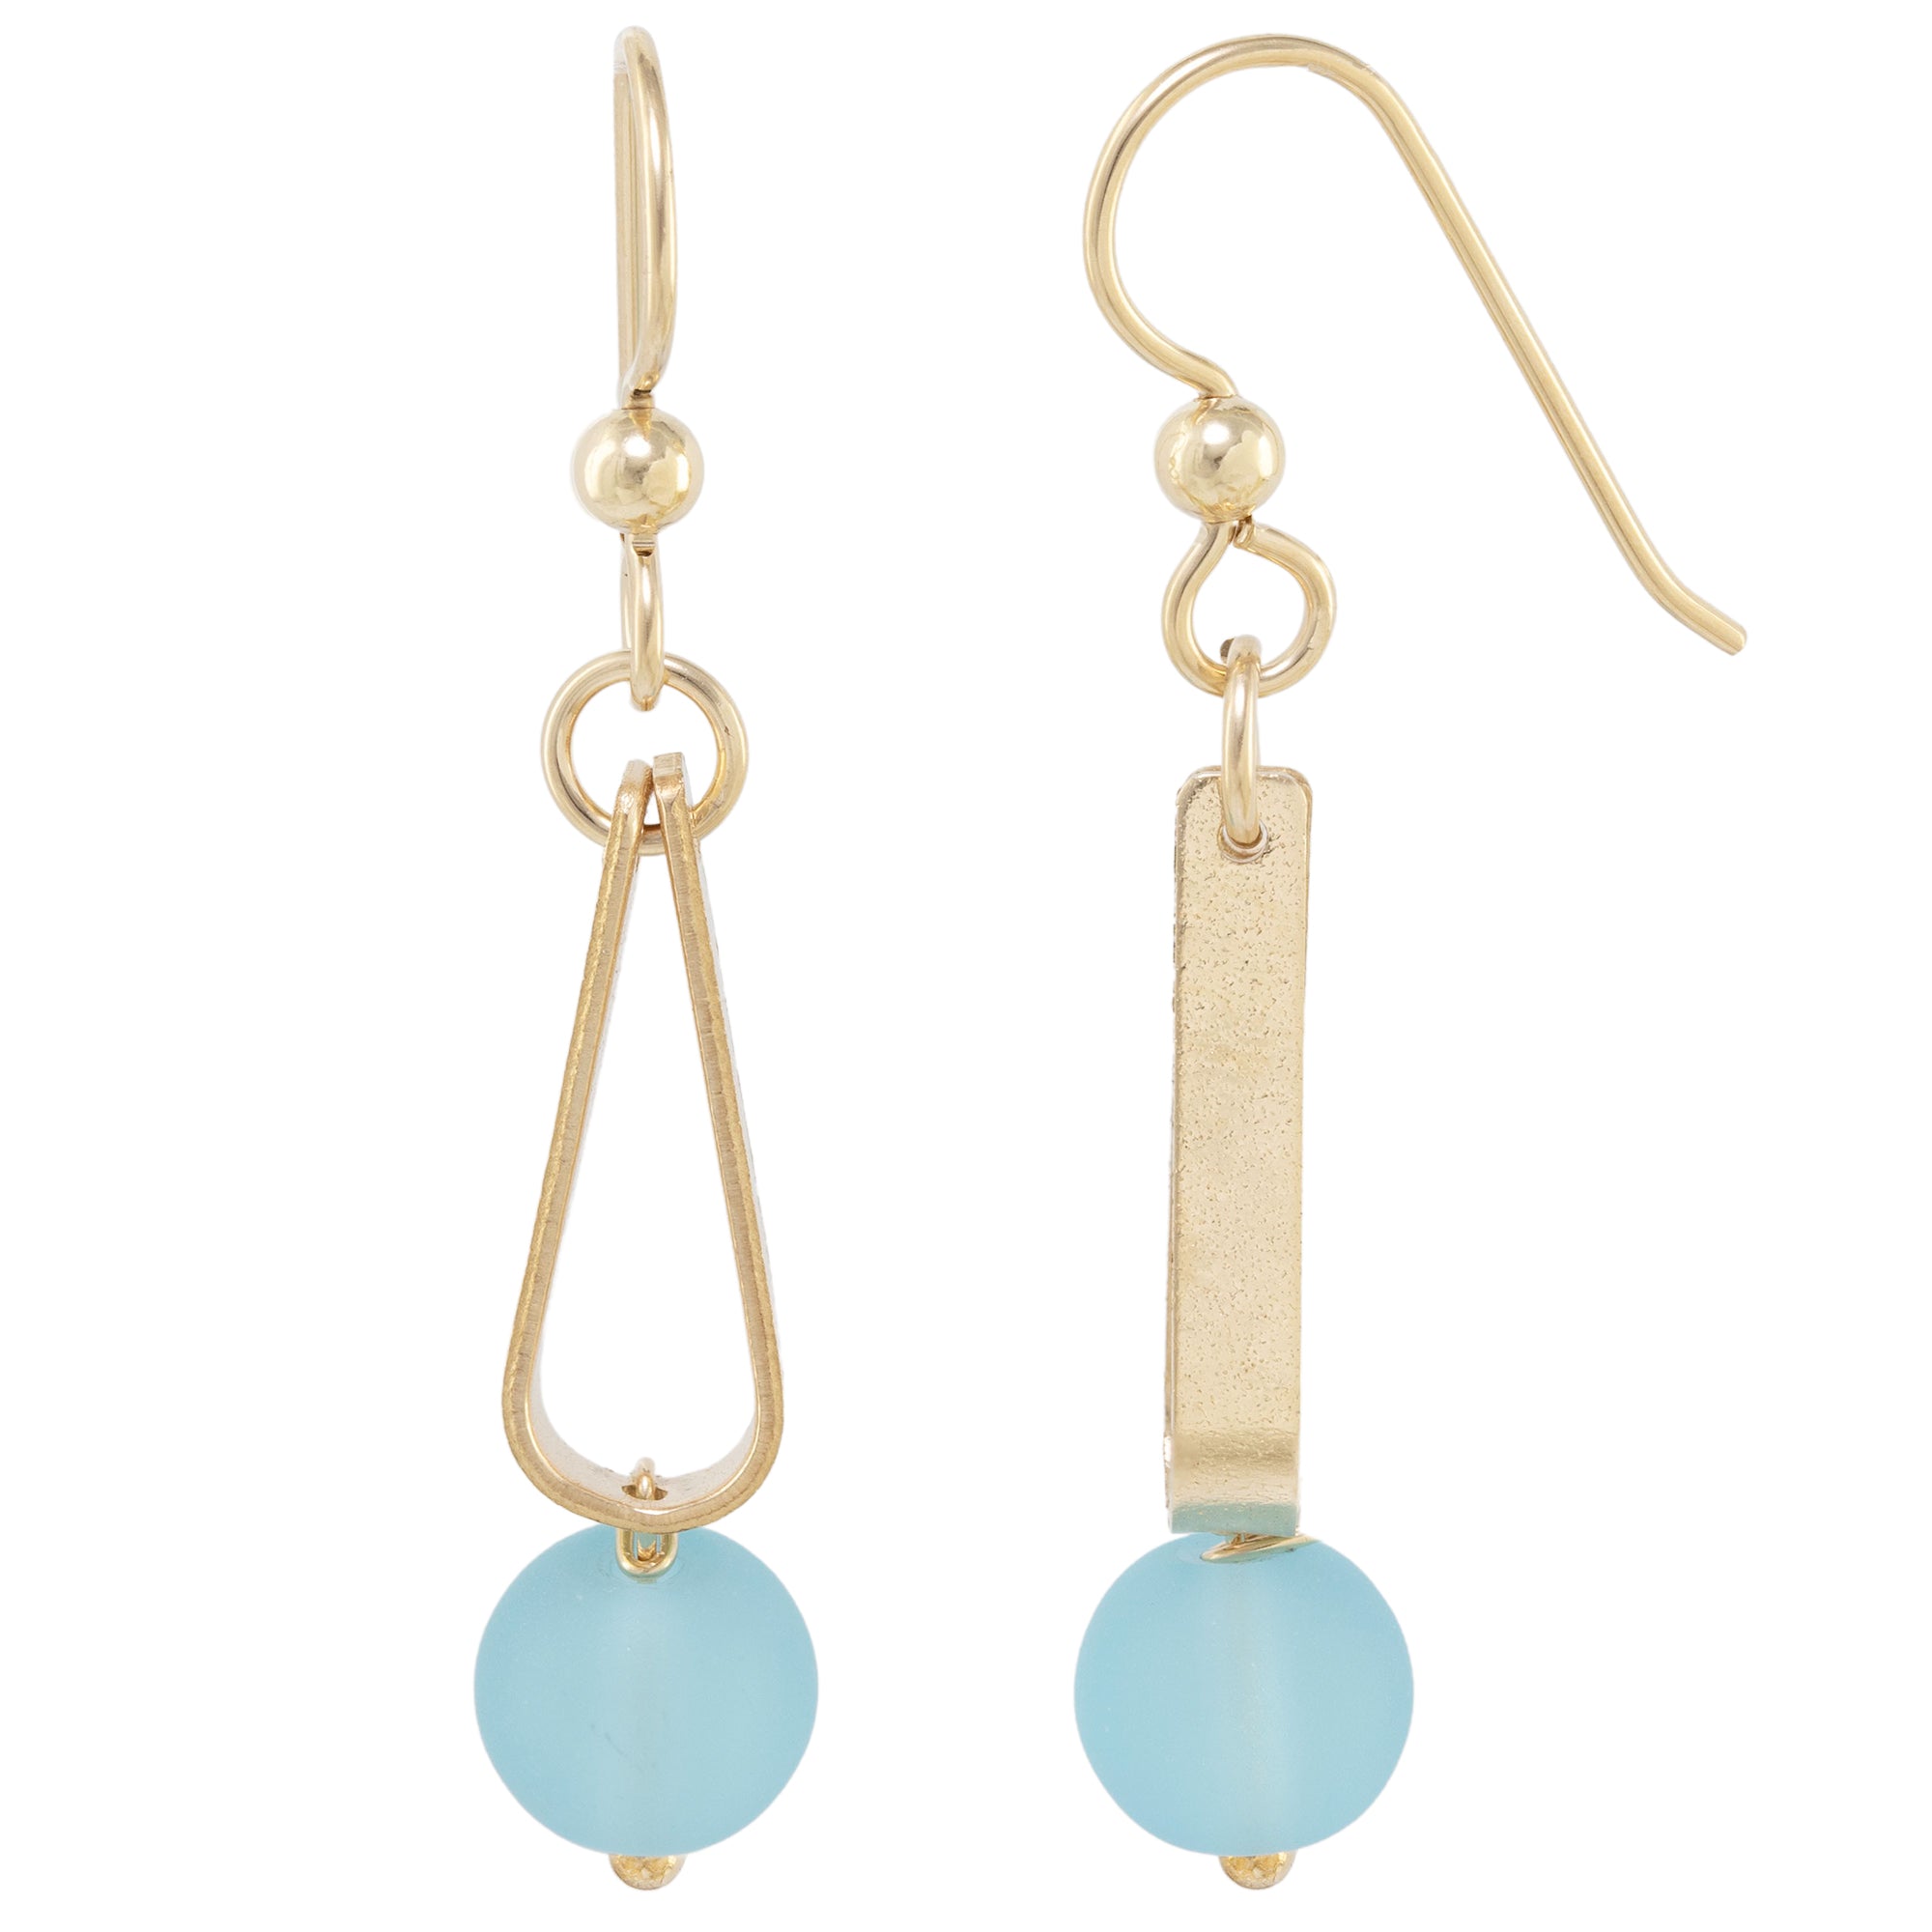 Light Baby Blue Round Recycled Glass Ball and 14K Gold Fill Teardrop Shaped Dangle Earrings